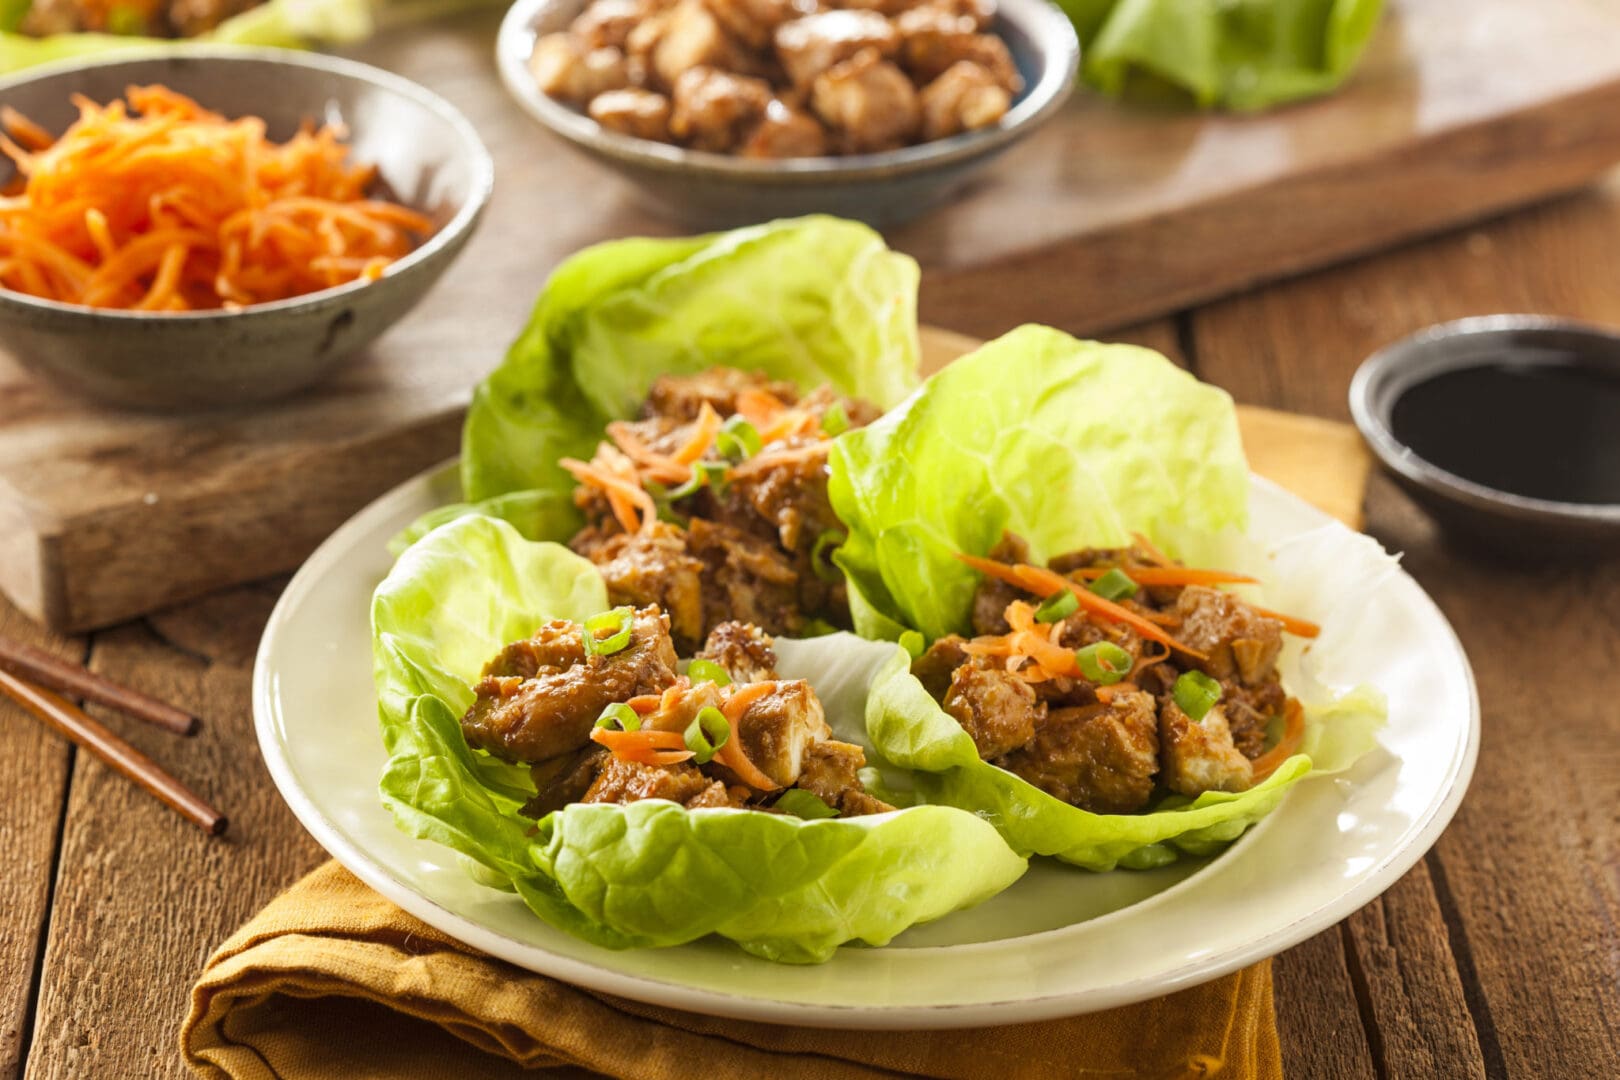 Asian lettuce wraps with chicken and carrots on a plate.